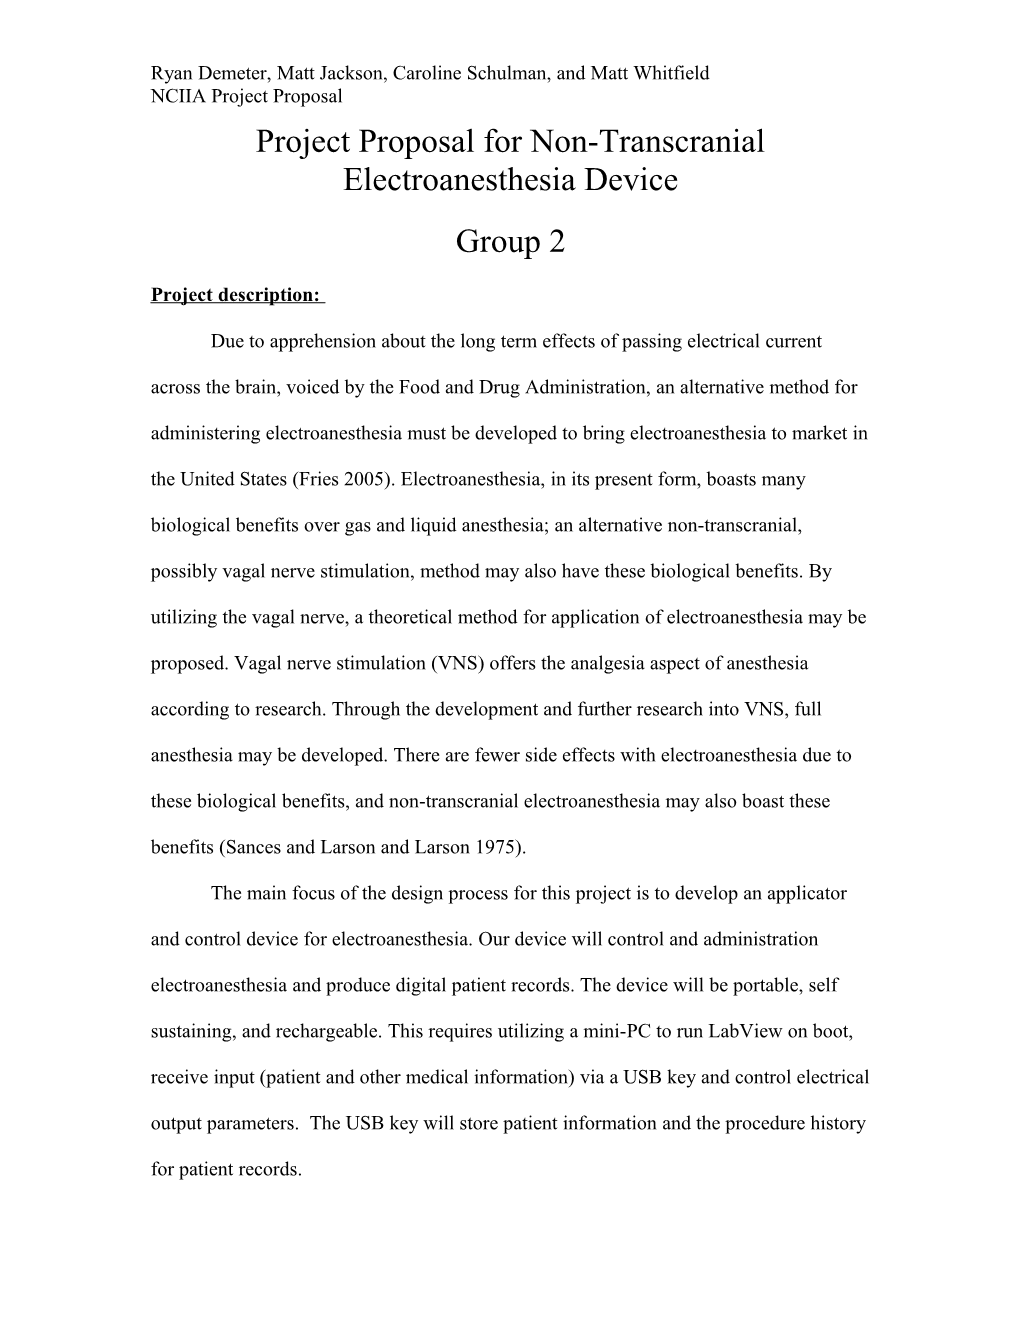 Project Proposal for Non-Transcranial Electroanesthesia Device